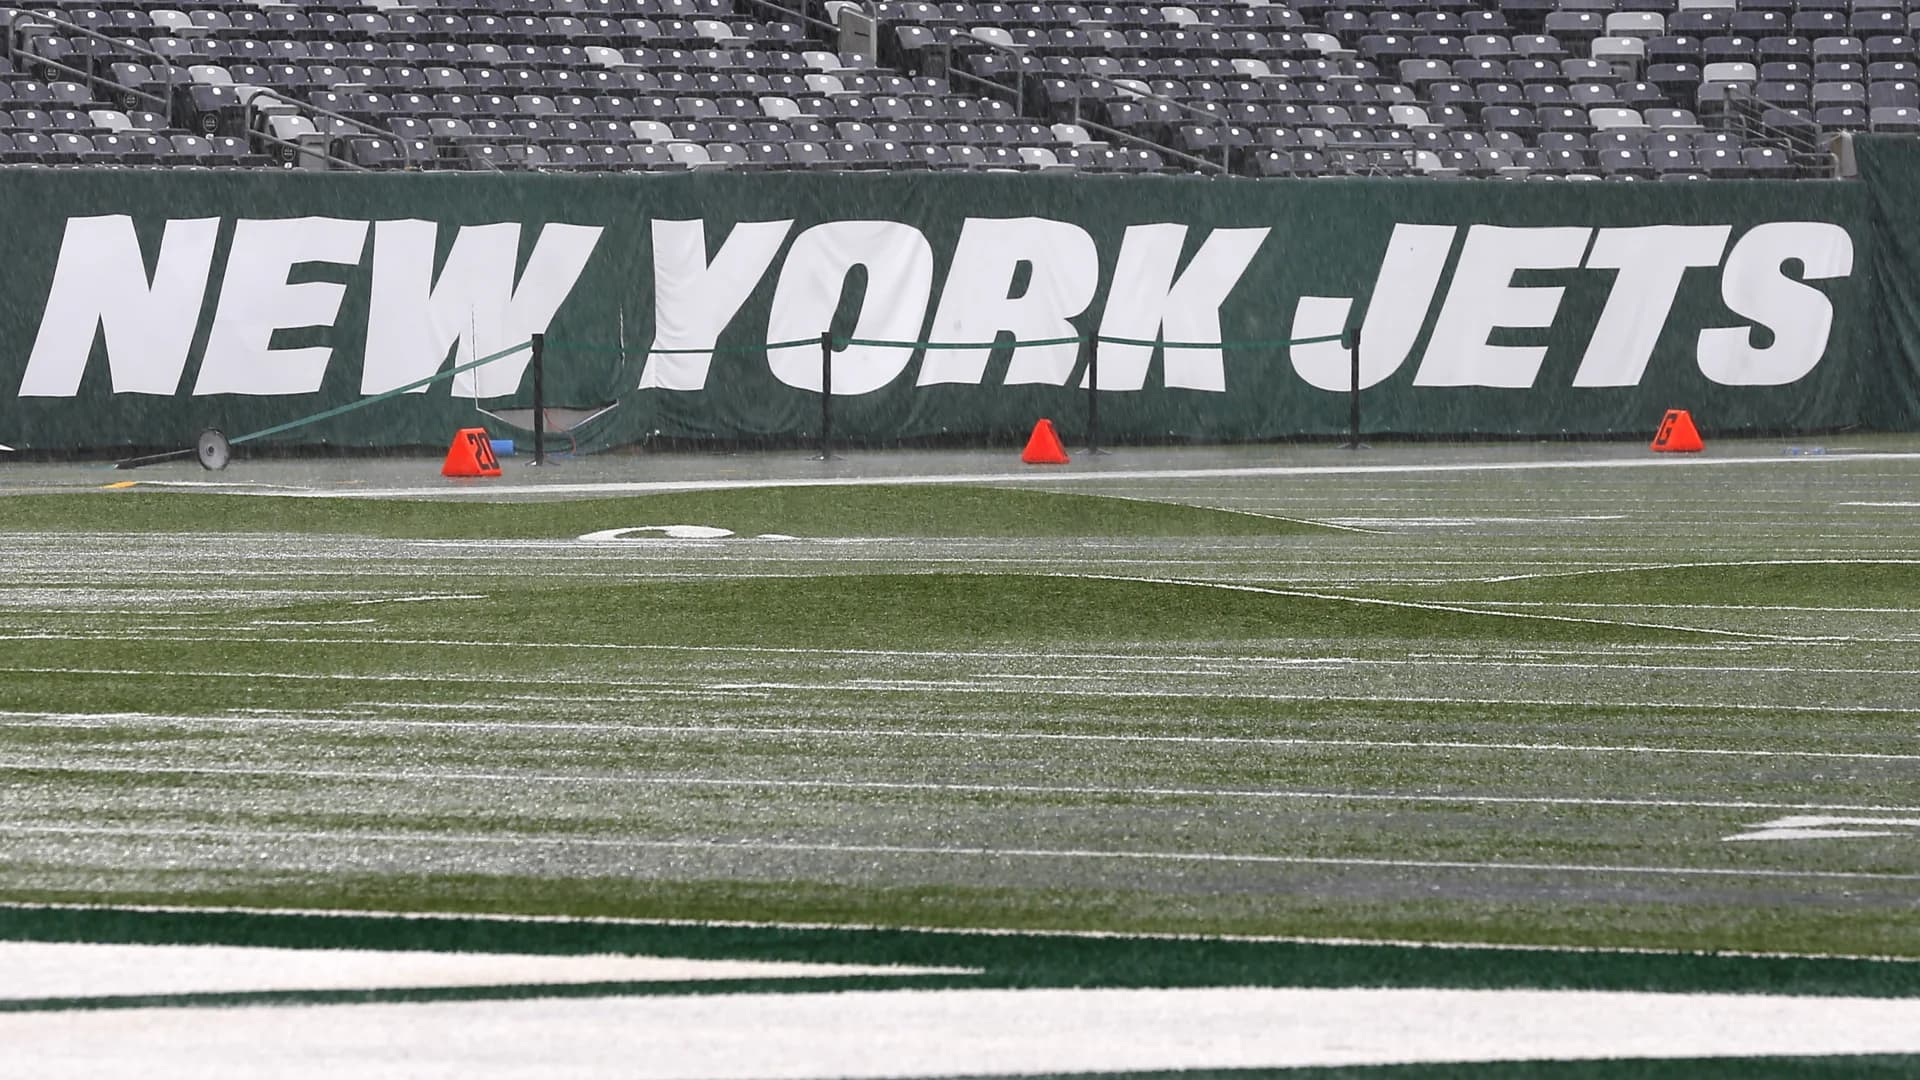 Former Jets O-linemen Powell, 67, and Sweeney, 60, die